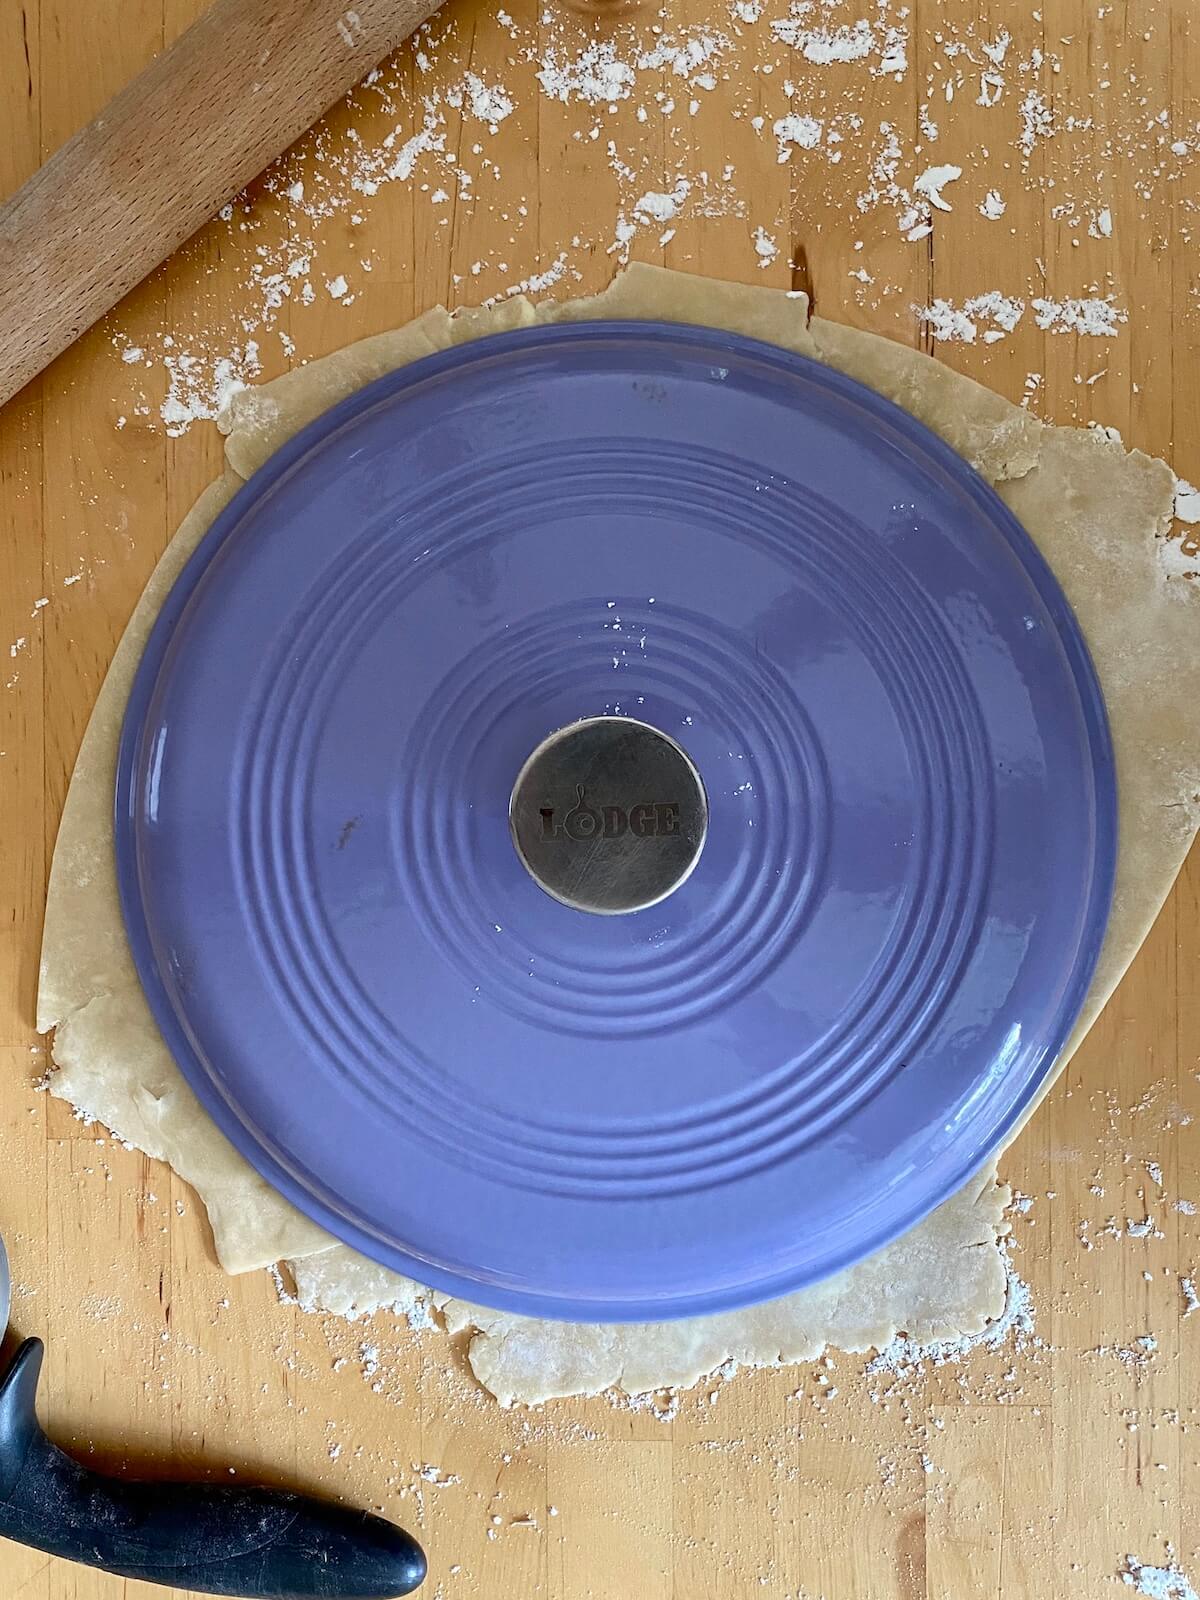 A rolled out pie dough with a purple dutch oven lid placed on top to measure it. There is flour sprinkled around the pie dough and the rolling pin and pizza cutter are off to the side.